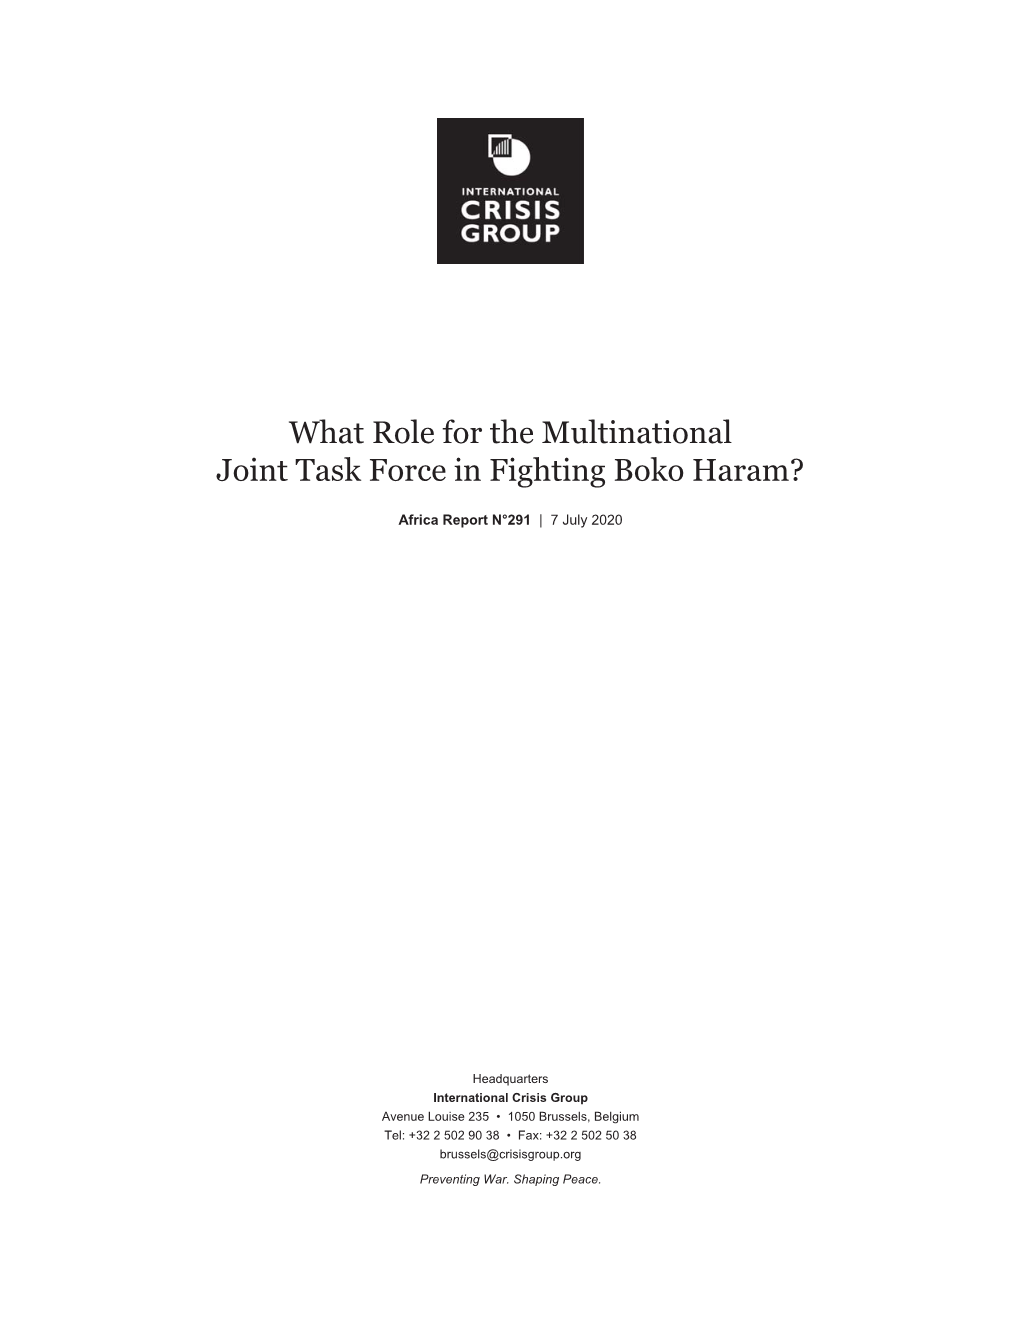 What Role for the Multinational Joint Task Force in Fighting Boko Haram?